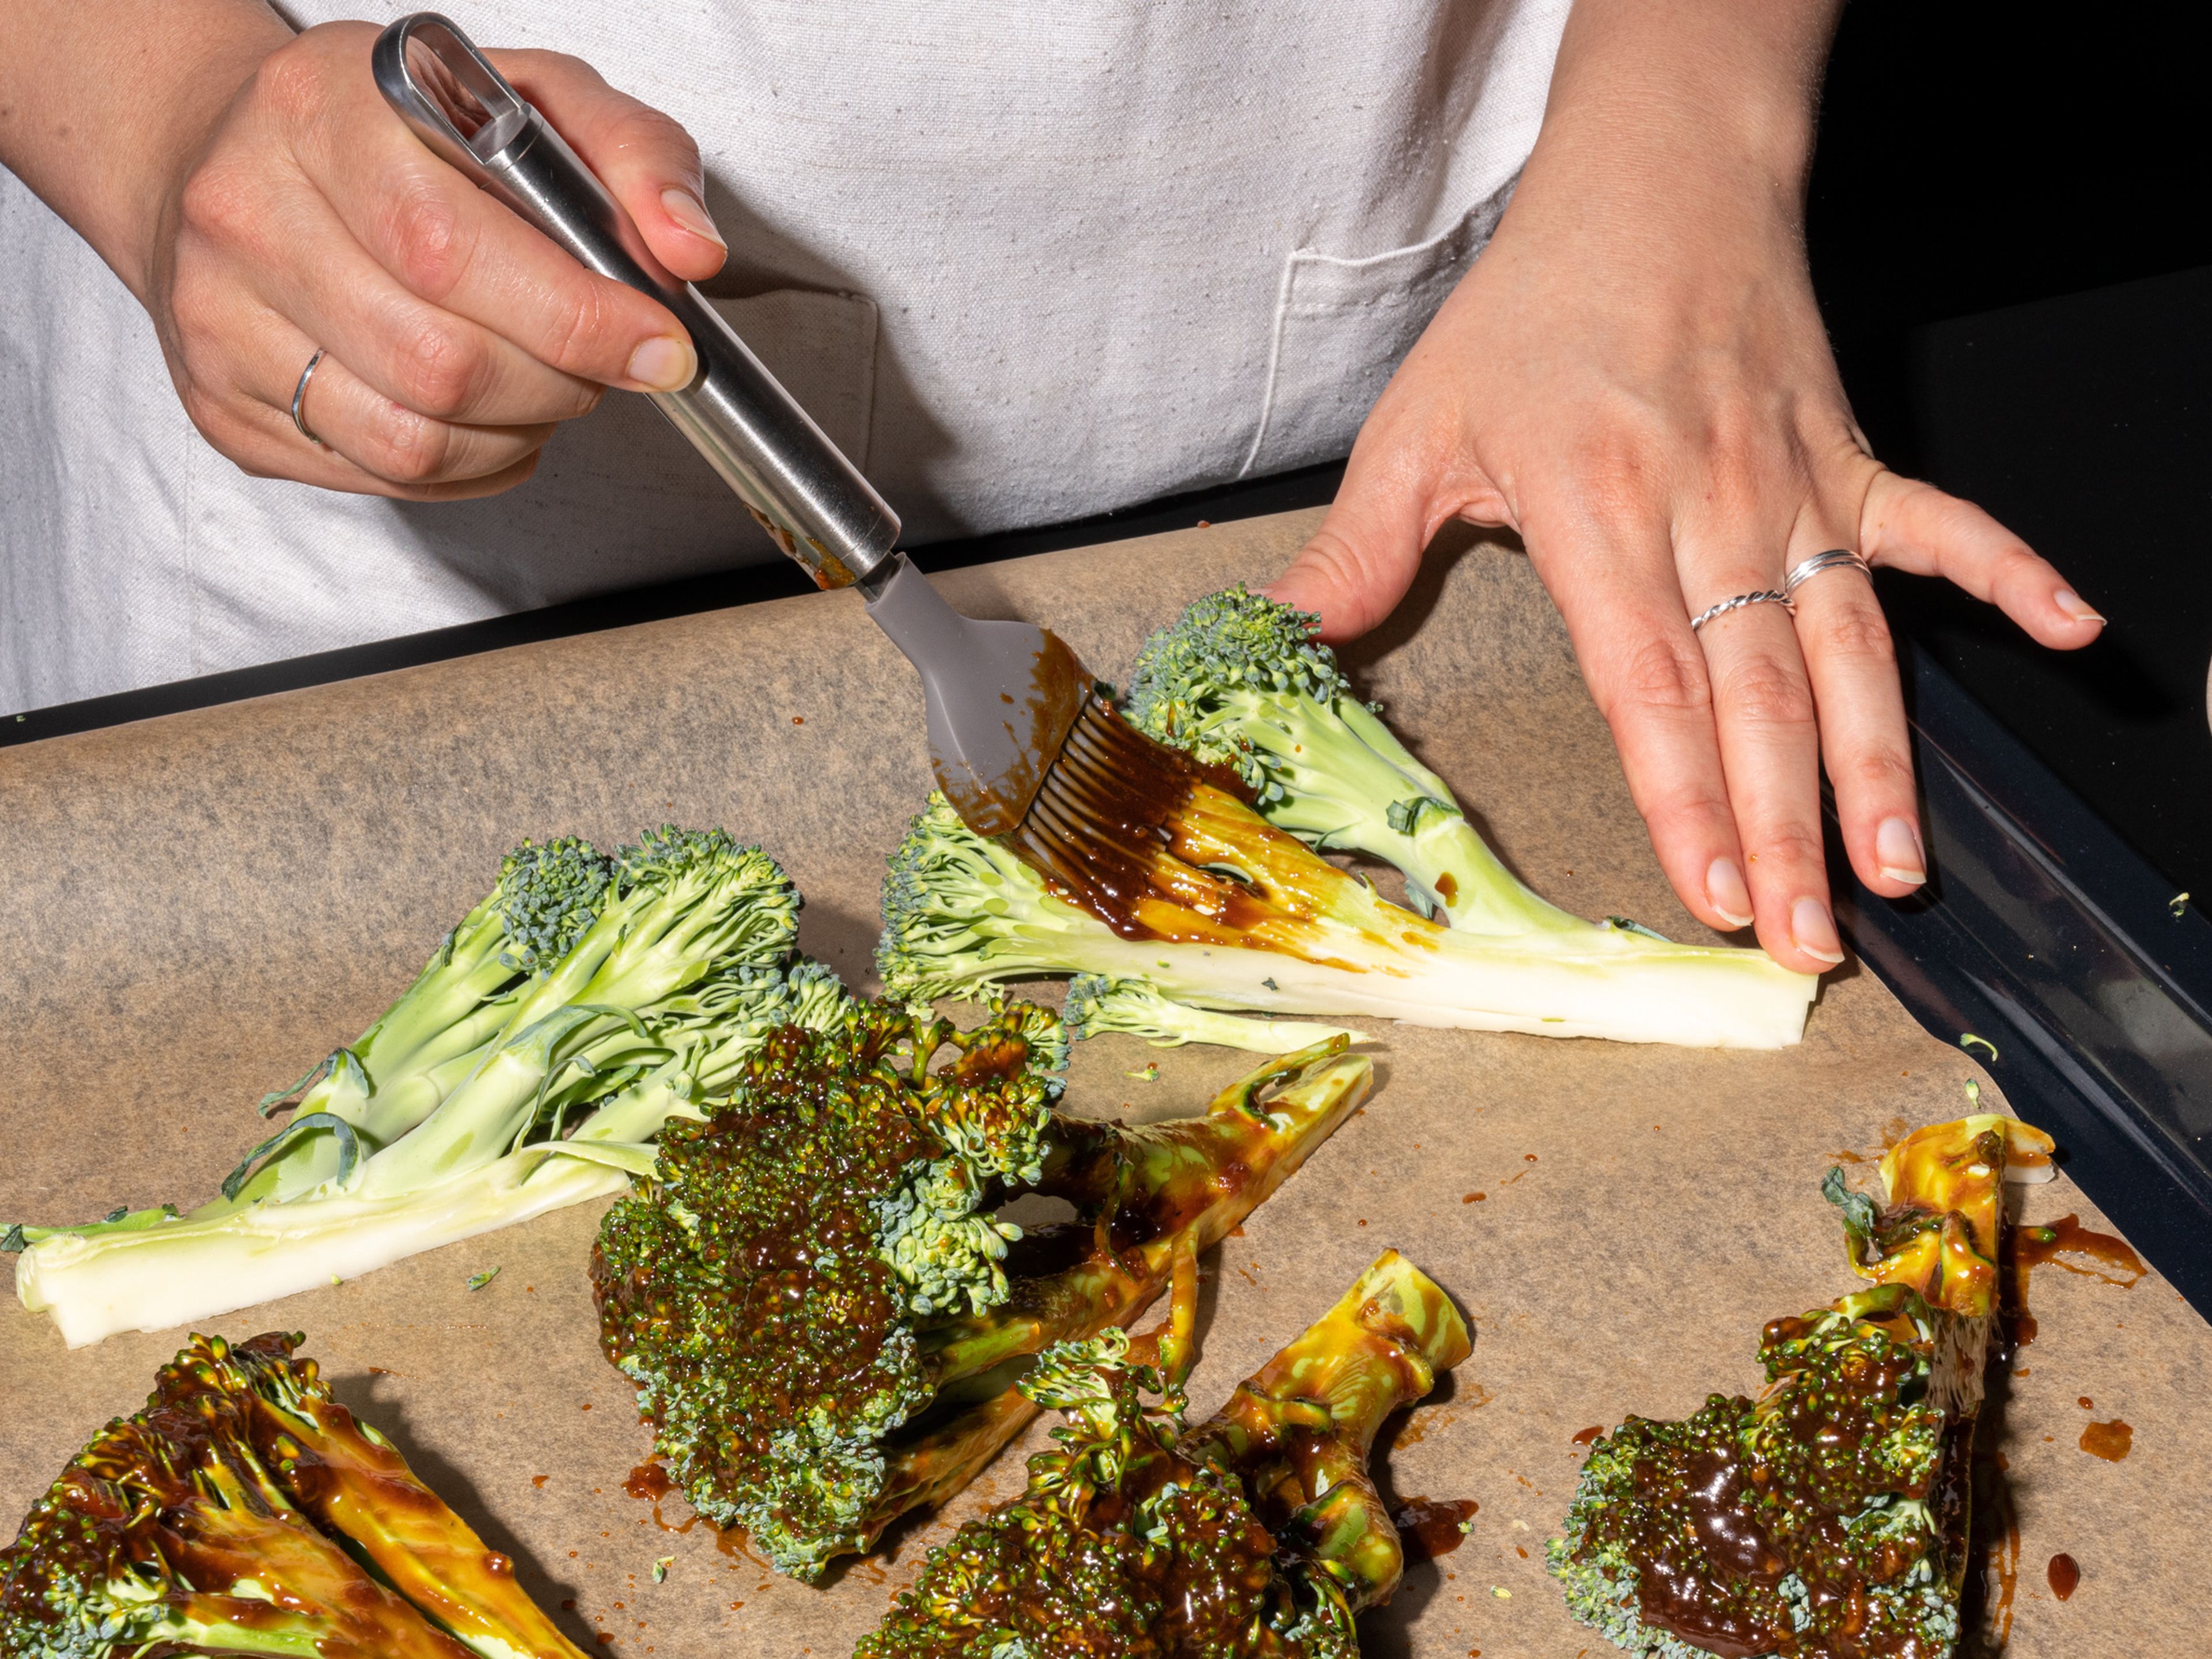 Transfer broccoli to a lined baking sheet. Brush with the hoisin glaze and drizzle with vegetable oil. Season with salt and roast for approx. 15 min. Flip and let roast for approx. 10 min. more, or until the broccoli is charred and fork tender in the thickest parts of the stem.